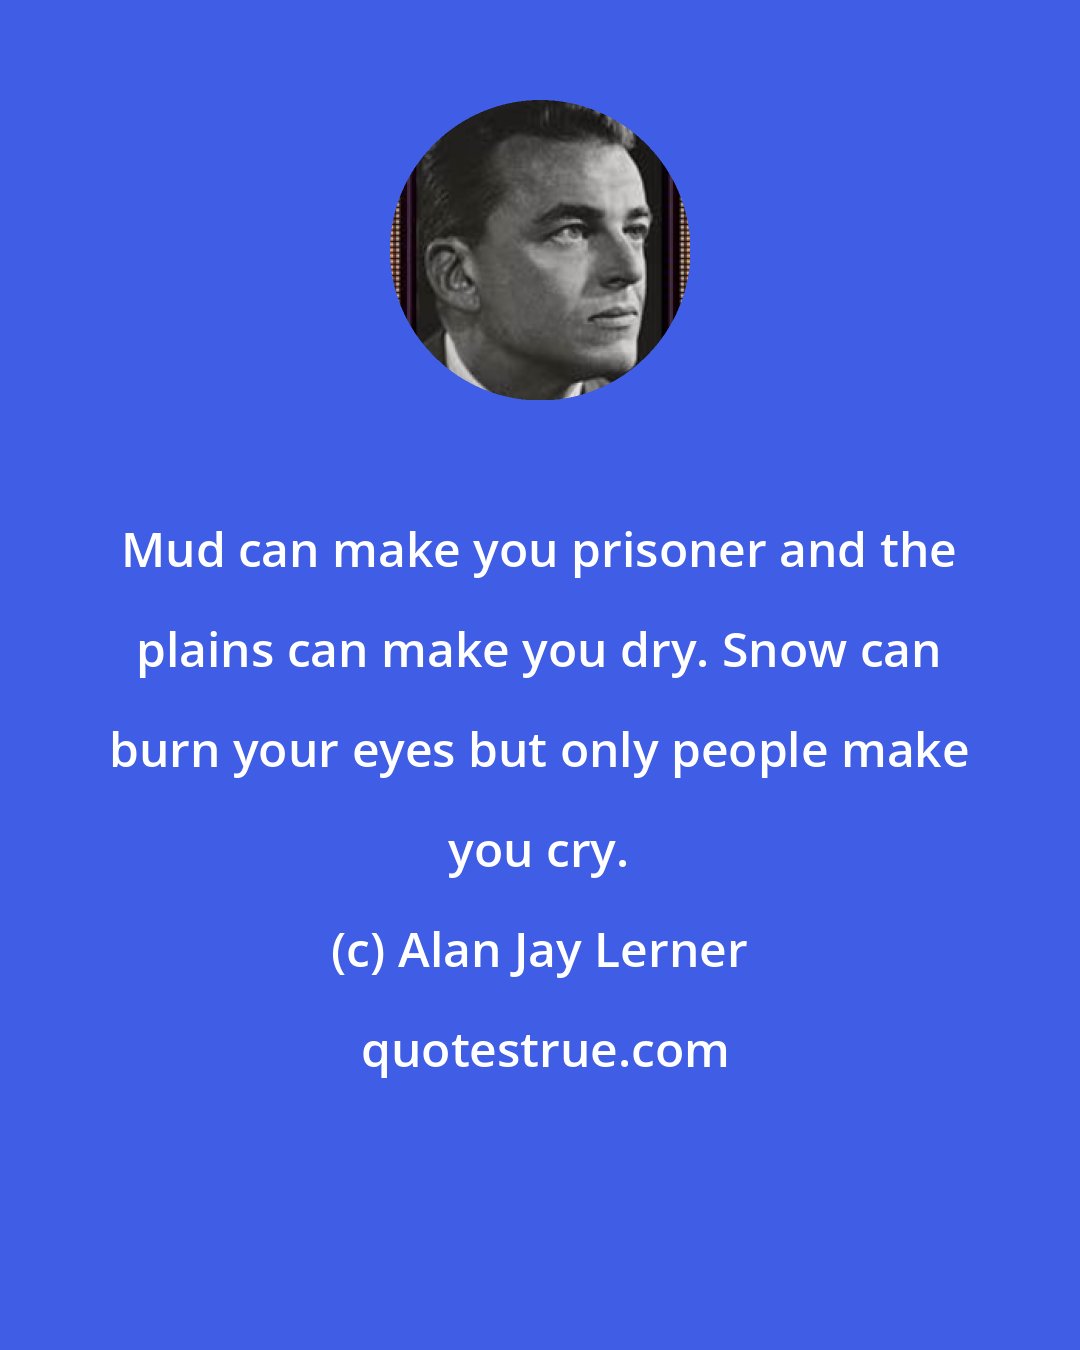 Alan Jay Lerner: Mud can make you prisoner and the plains can make you dry. Snow can burn your eyes but only people make you cry.